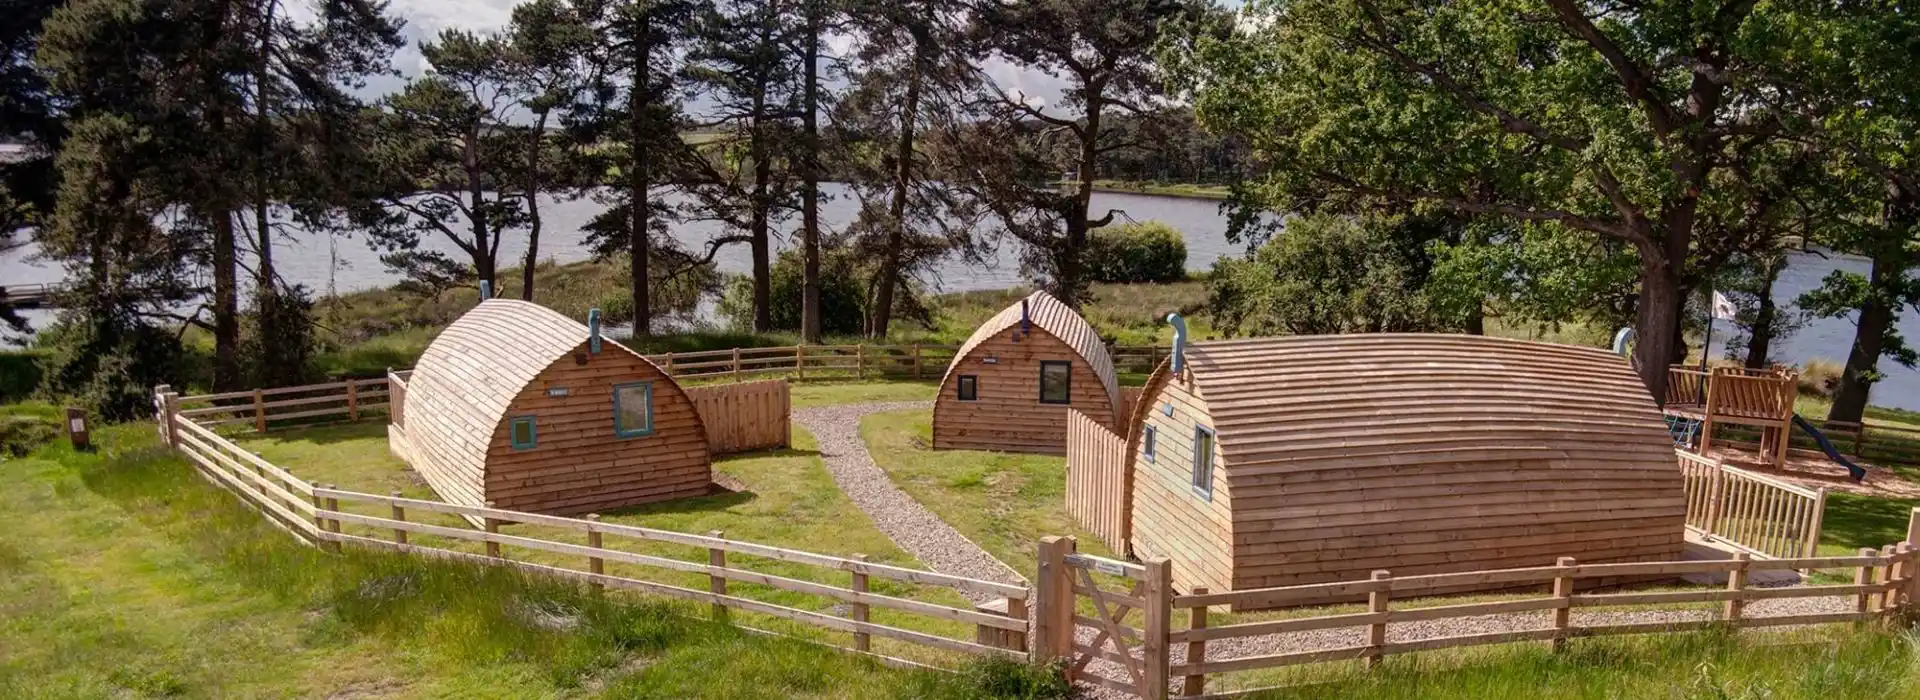 Camping and glamping pods in Northumberland